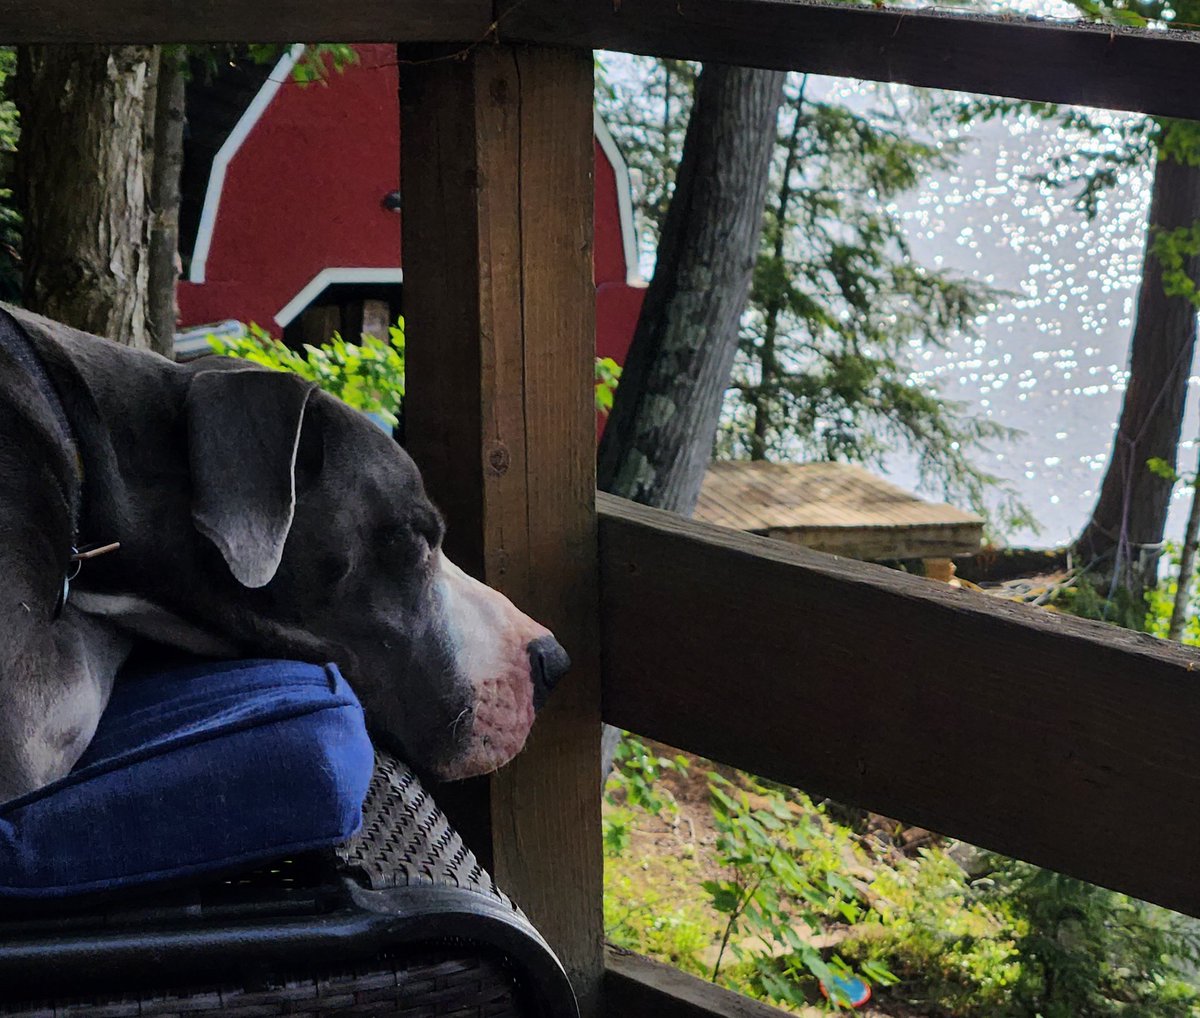 It's Friday and we're relaxing at the cottage. Hope you all have a wonderful weekend planned.😊 #dogs #dogsoftwitter #dogtwitter #cottagelife